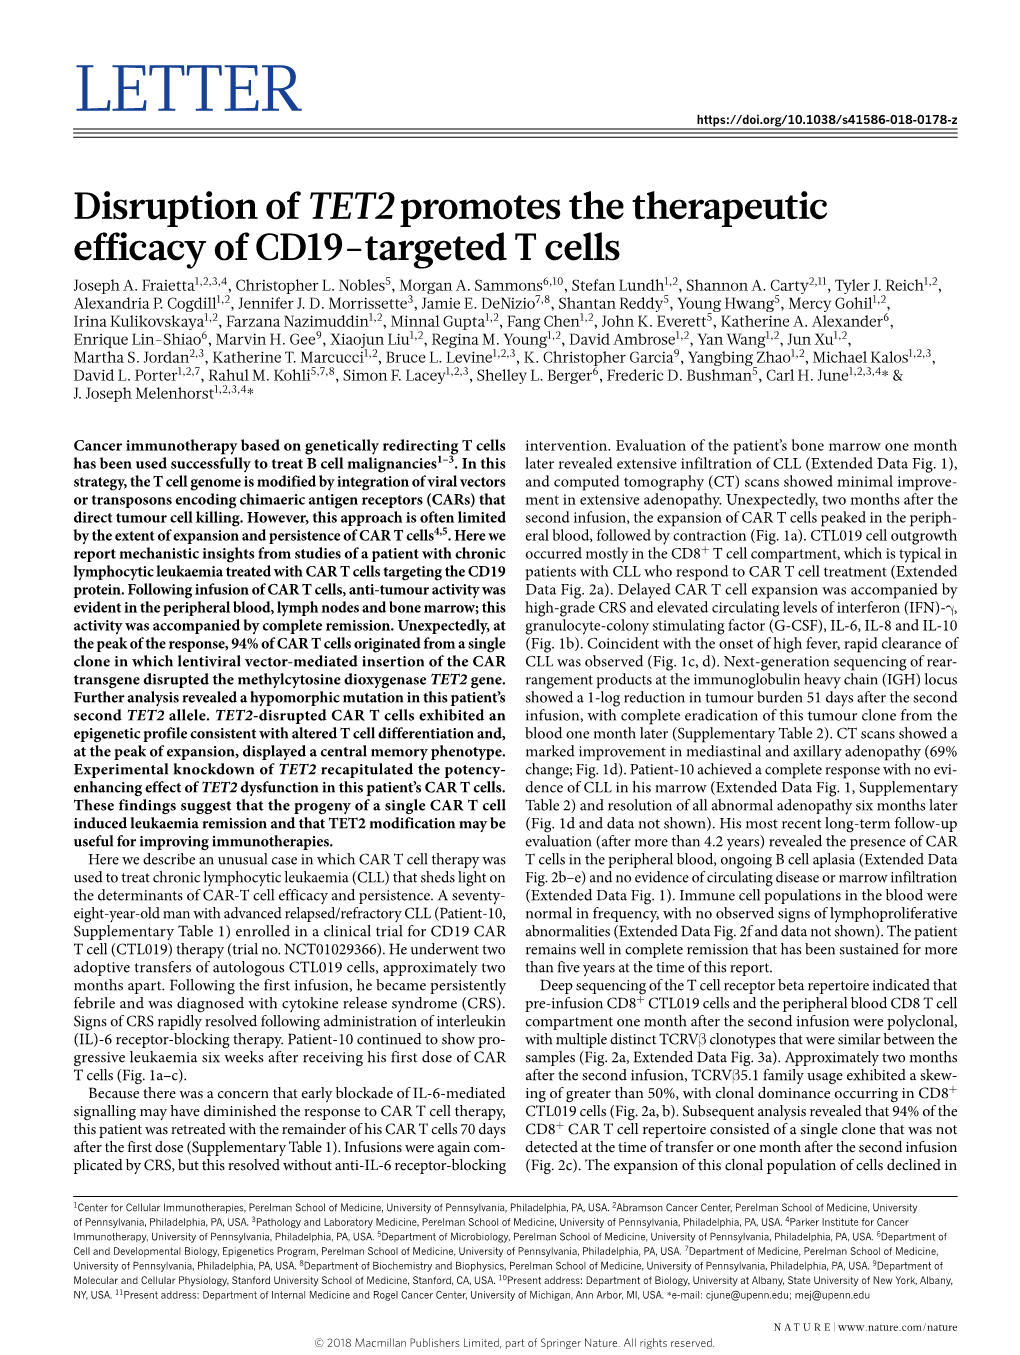 Disruption of TET2 Promotes the Therapeutic Efficacy of CD19-Targeted T Cells Joseph A